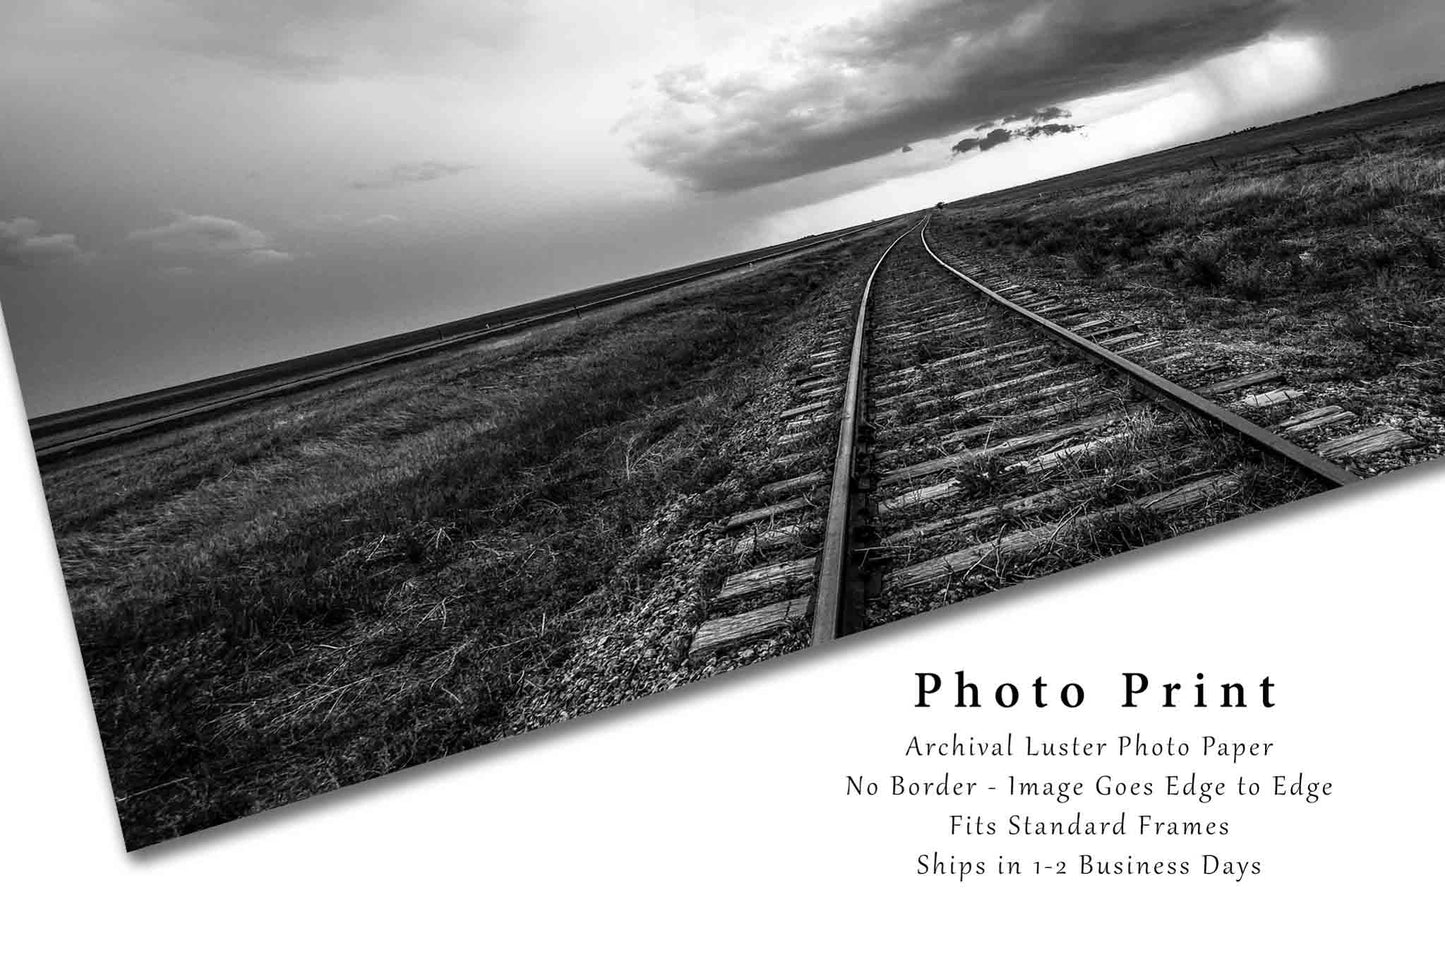 Storm Photography Print (Not Framed) Black and White Picture of Train Tracks Leading to Thunderstorm on Stormy Day in Kansas Great Plains Wall Art Railroad Decor